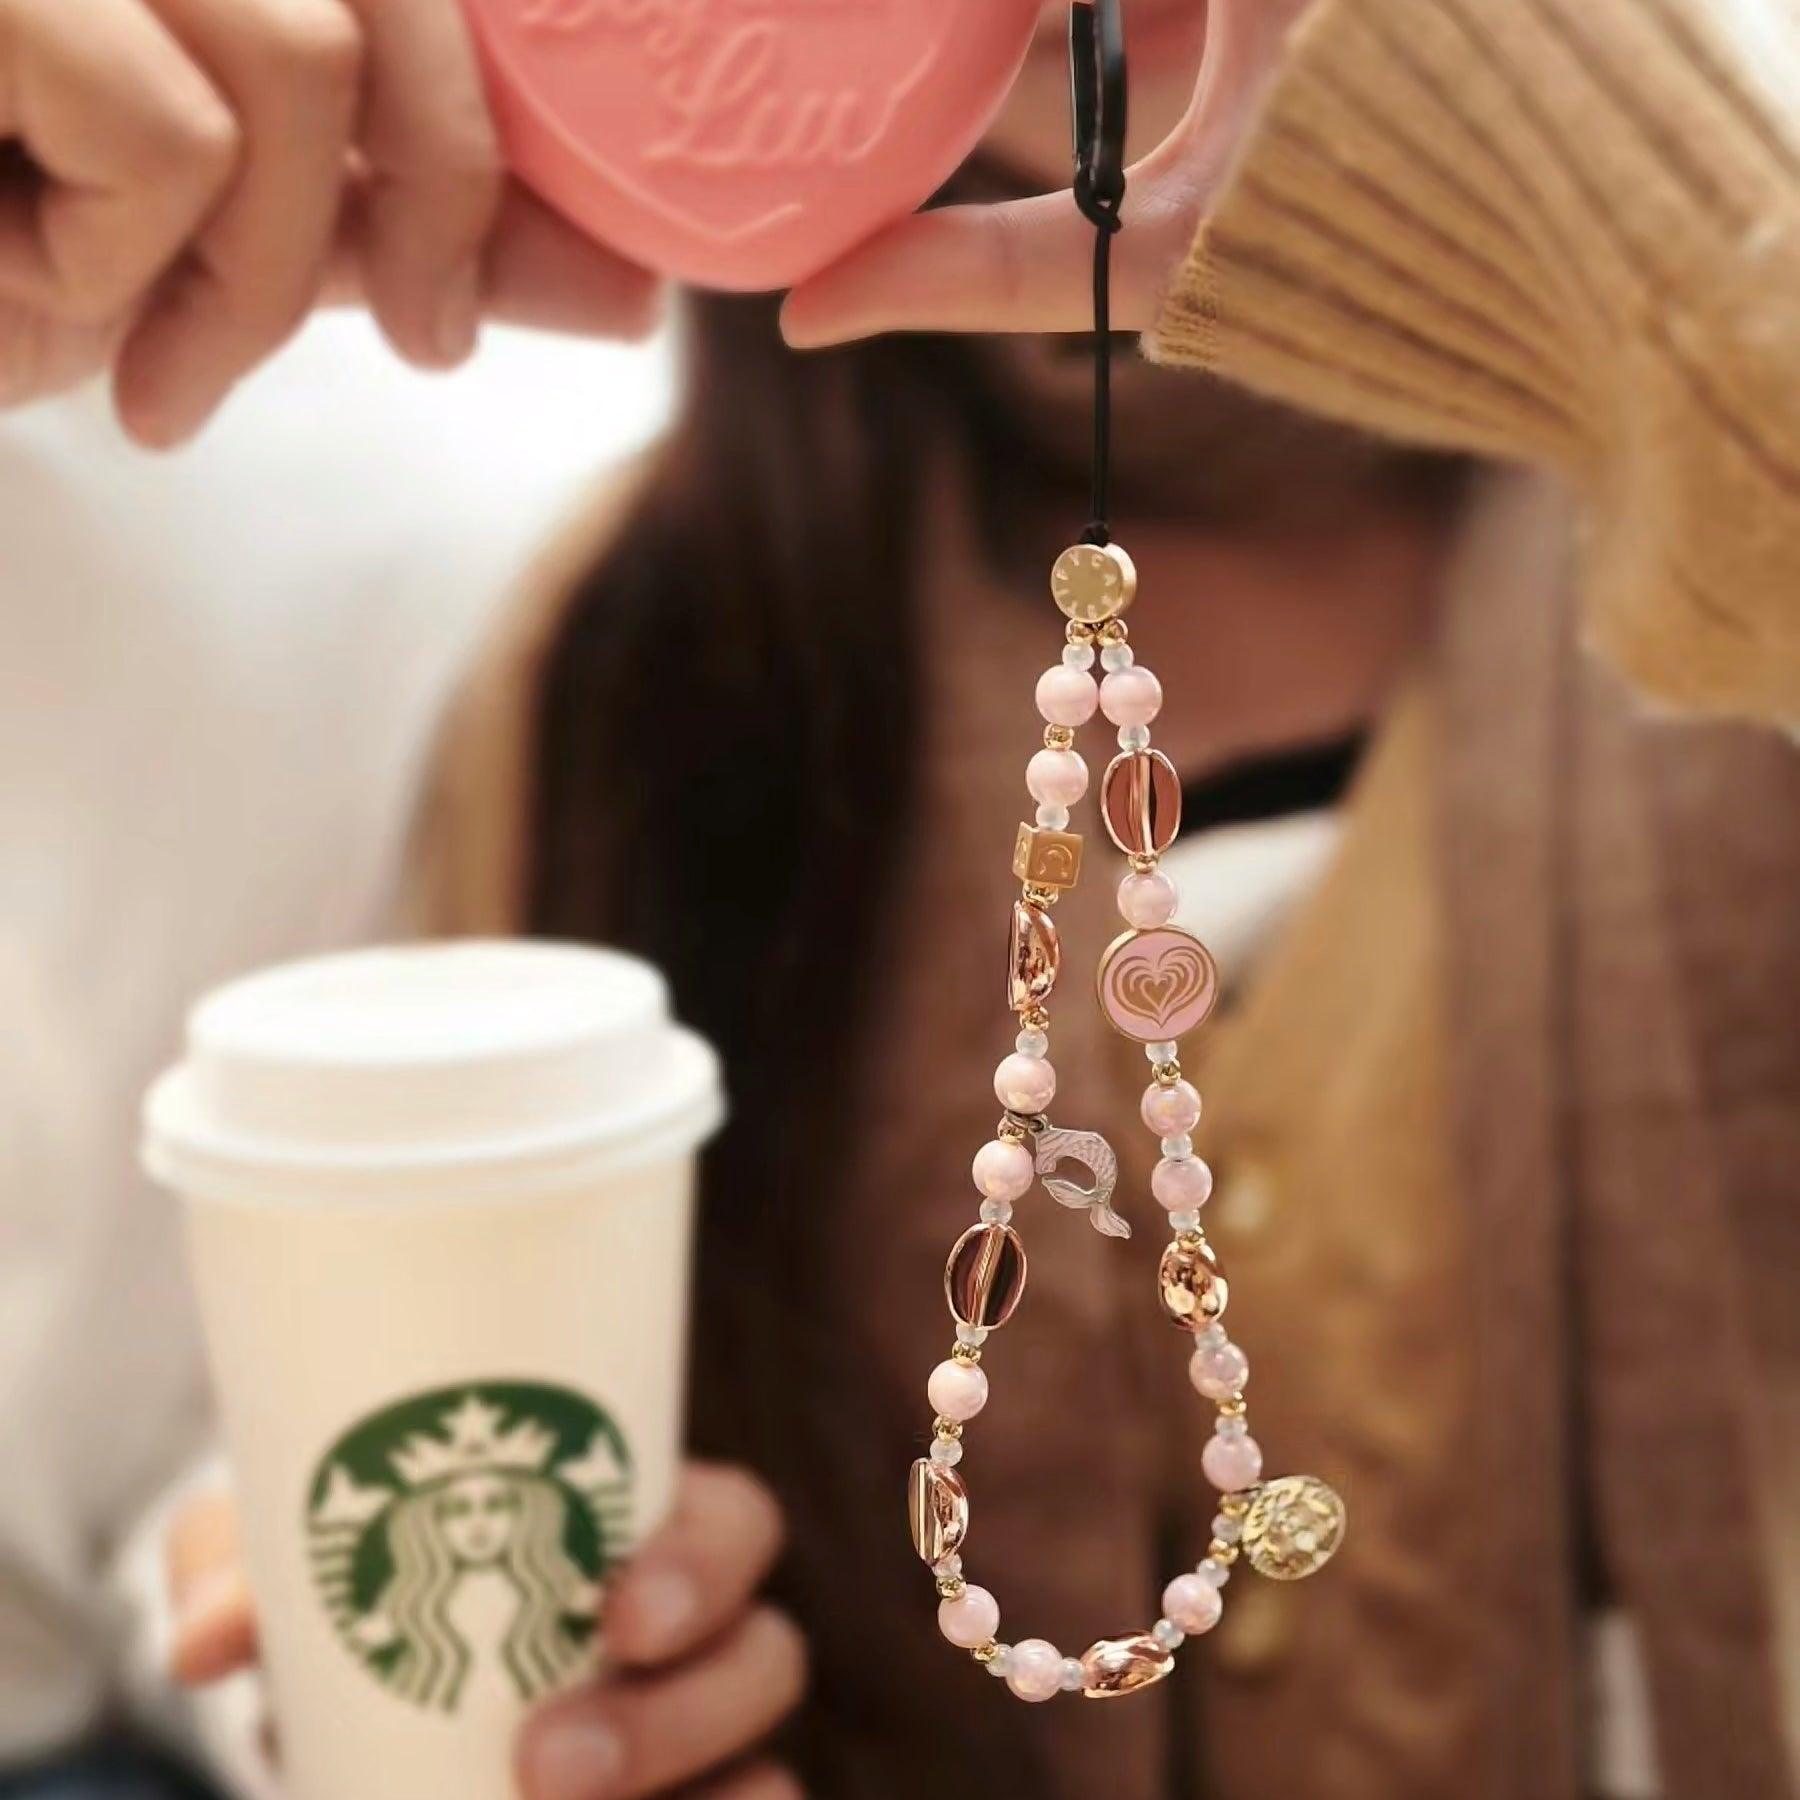 CASETiFY x Starbucks Valentine's Day Limited Edition Mobile Chain